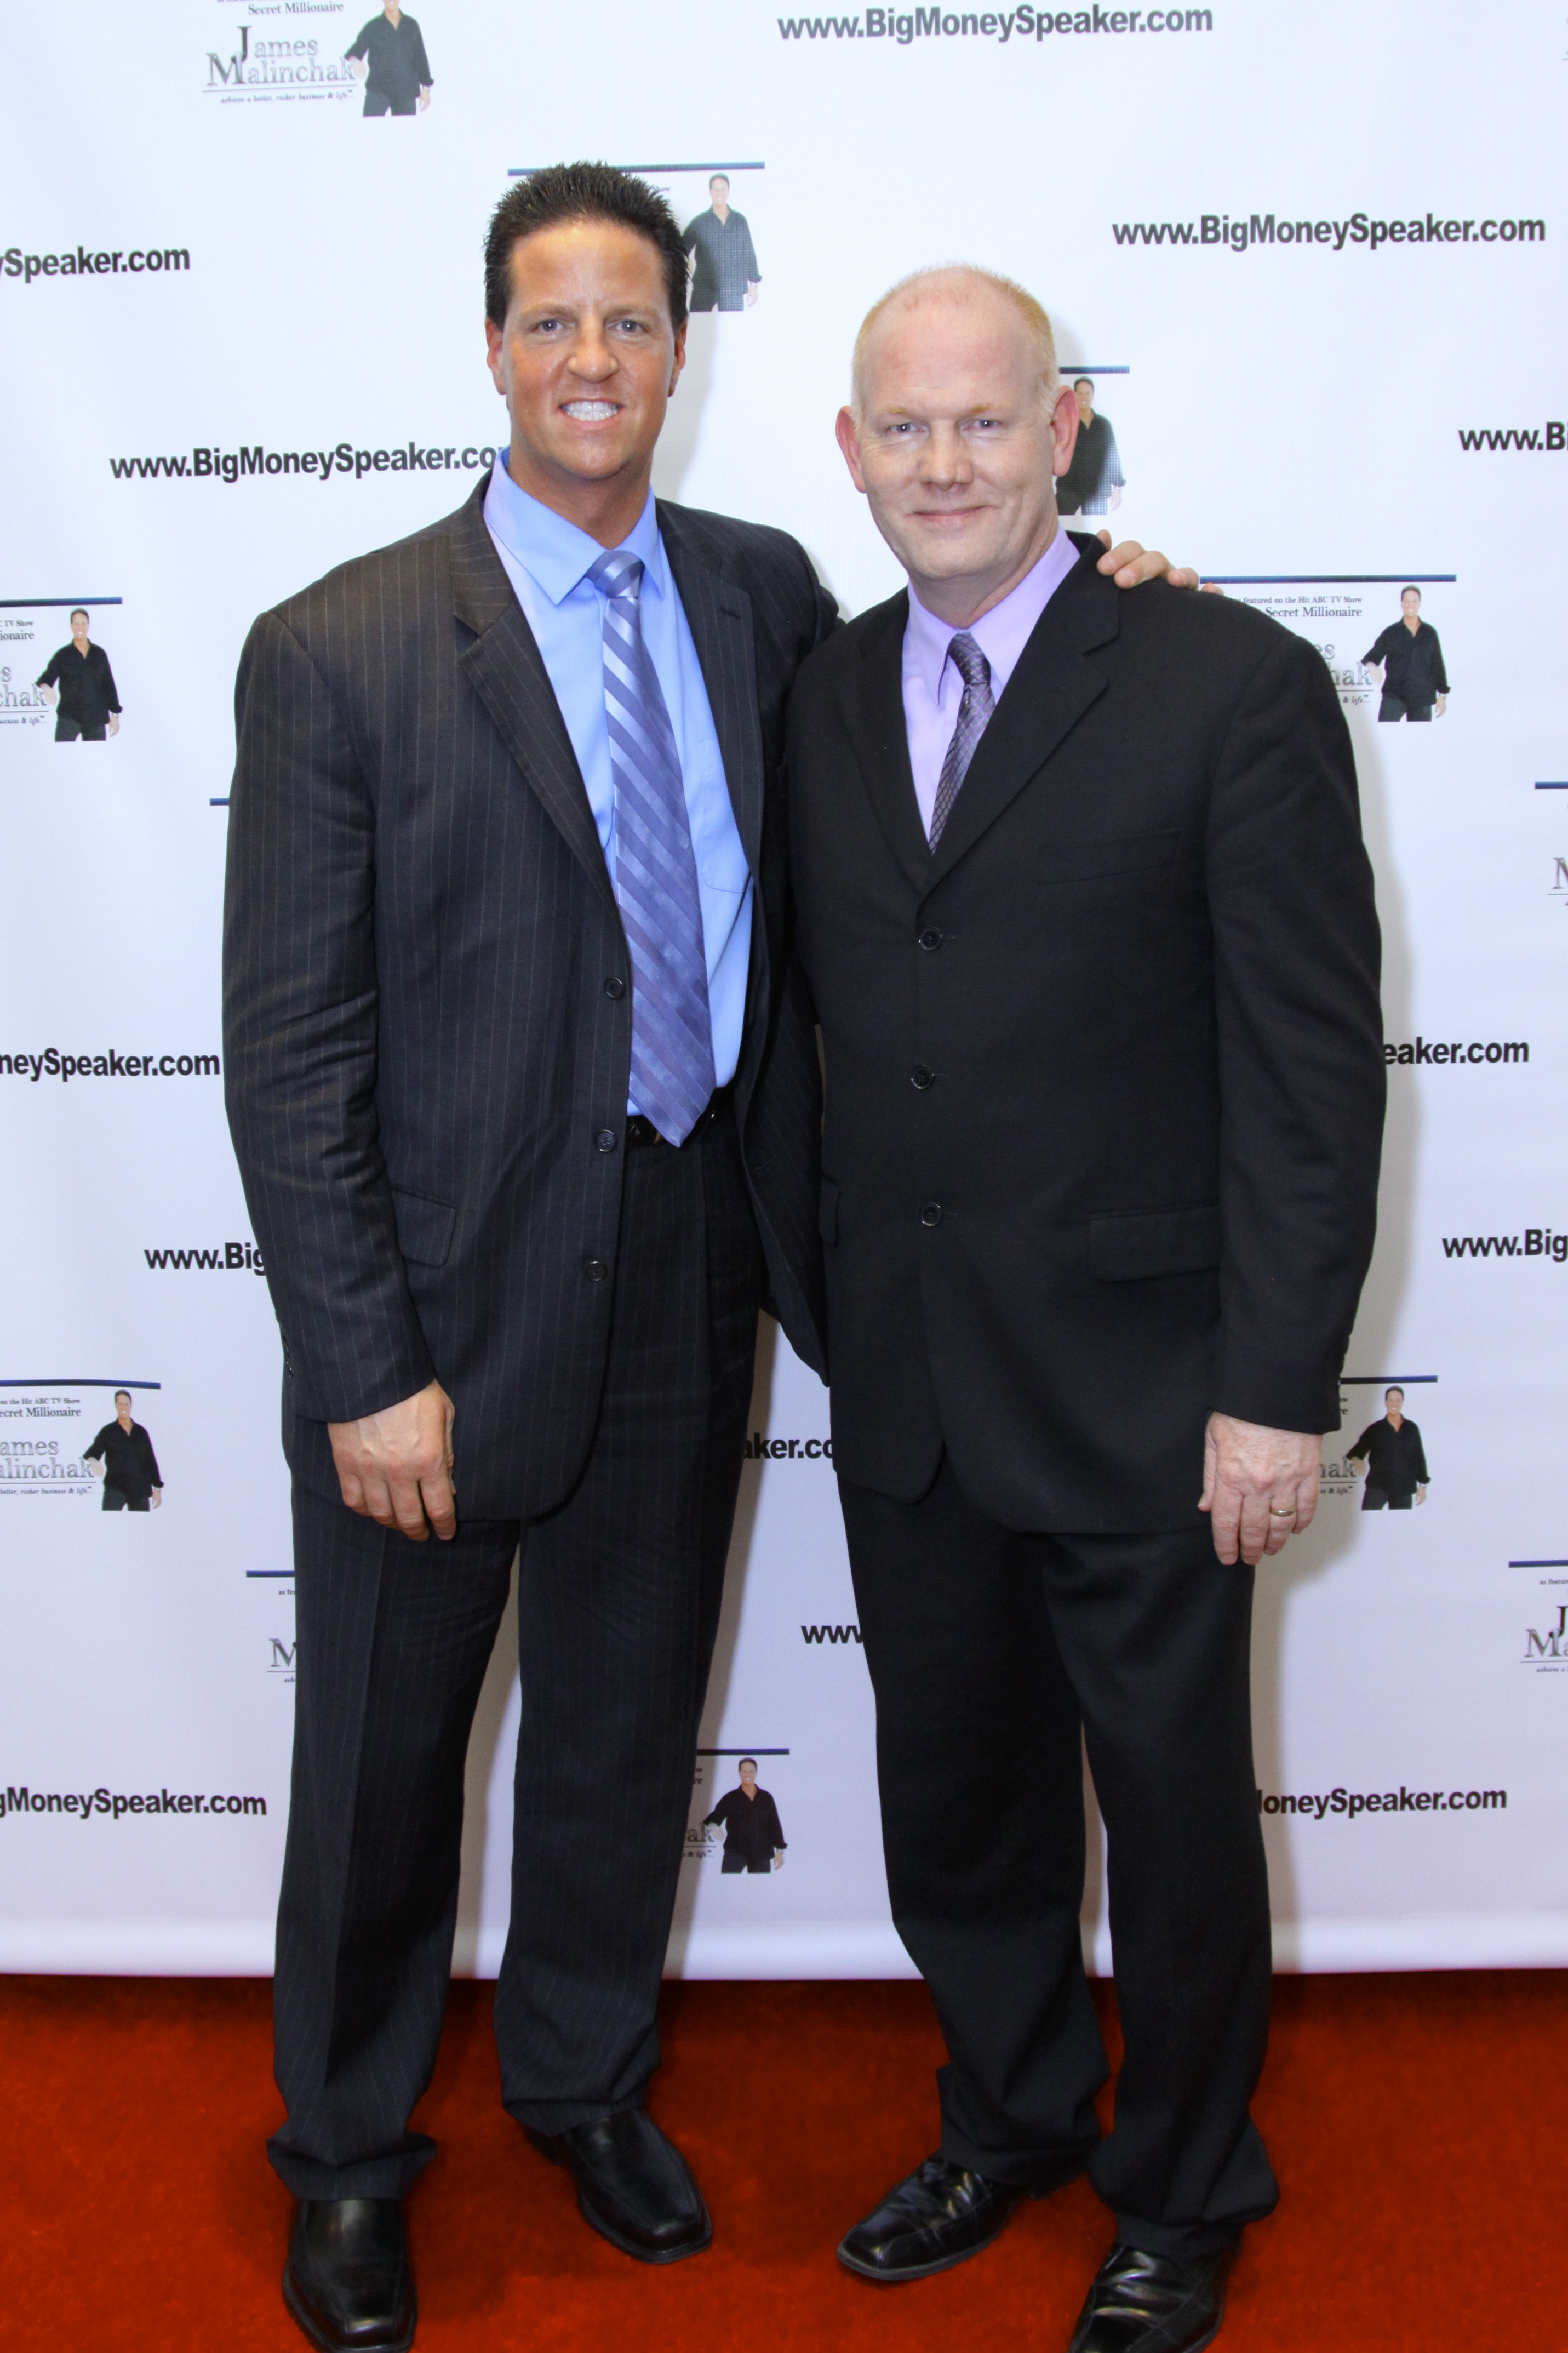 Actor Glenn Morshower at James Malinchak's Big Money Speaker Boot Camp. James Malinchak, Featured on ABC's Hit TV Show, Secret Millionaire, is one of America's highest-paid, most in-demand motivational and business public speakers.